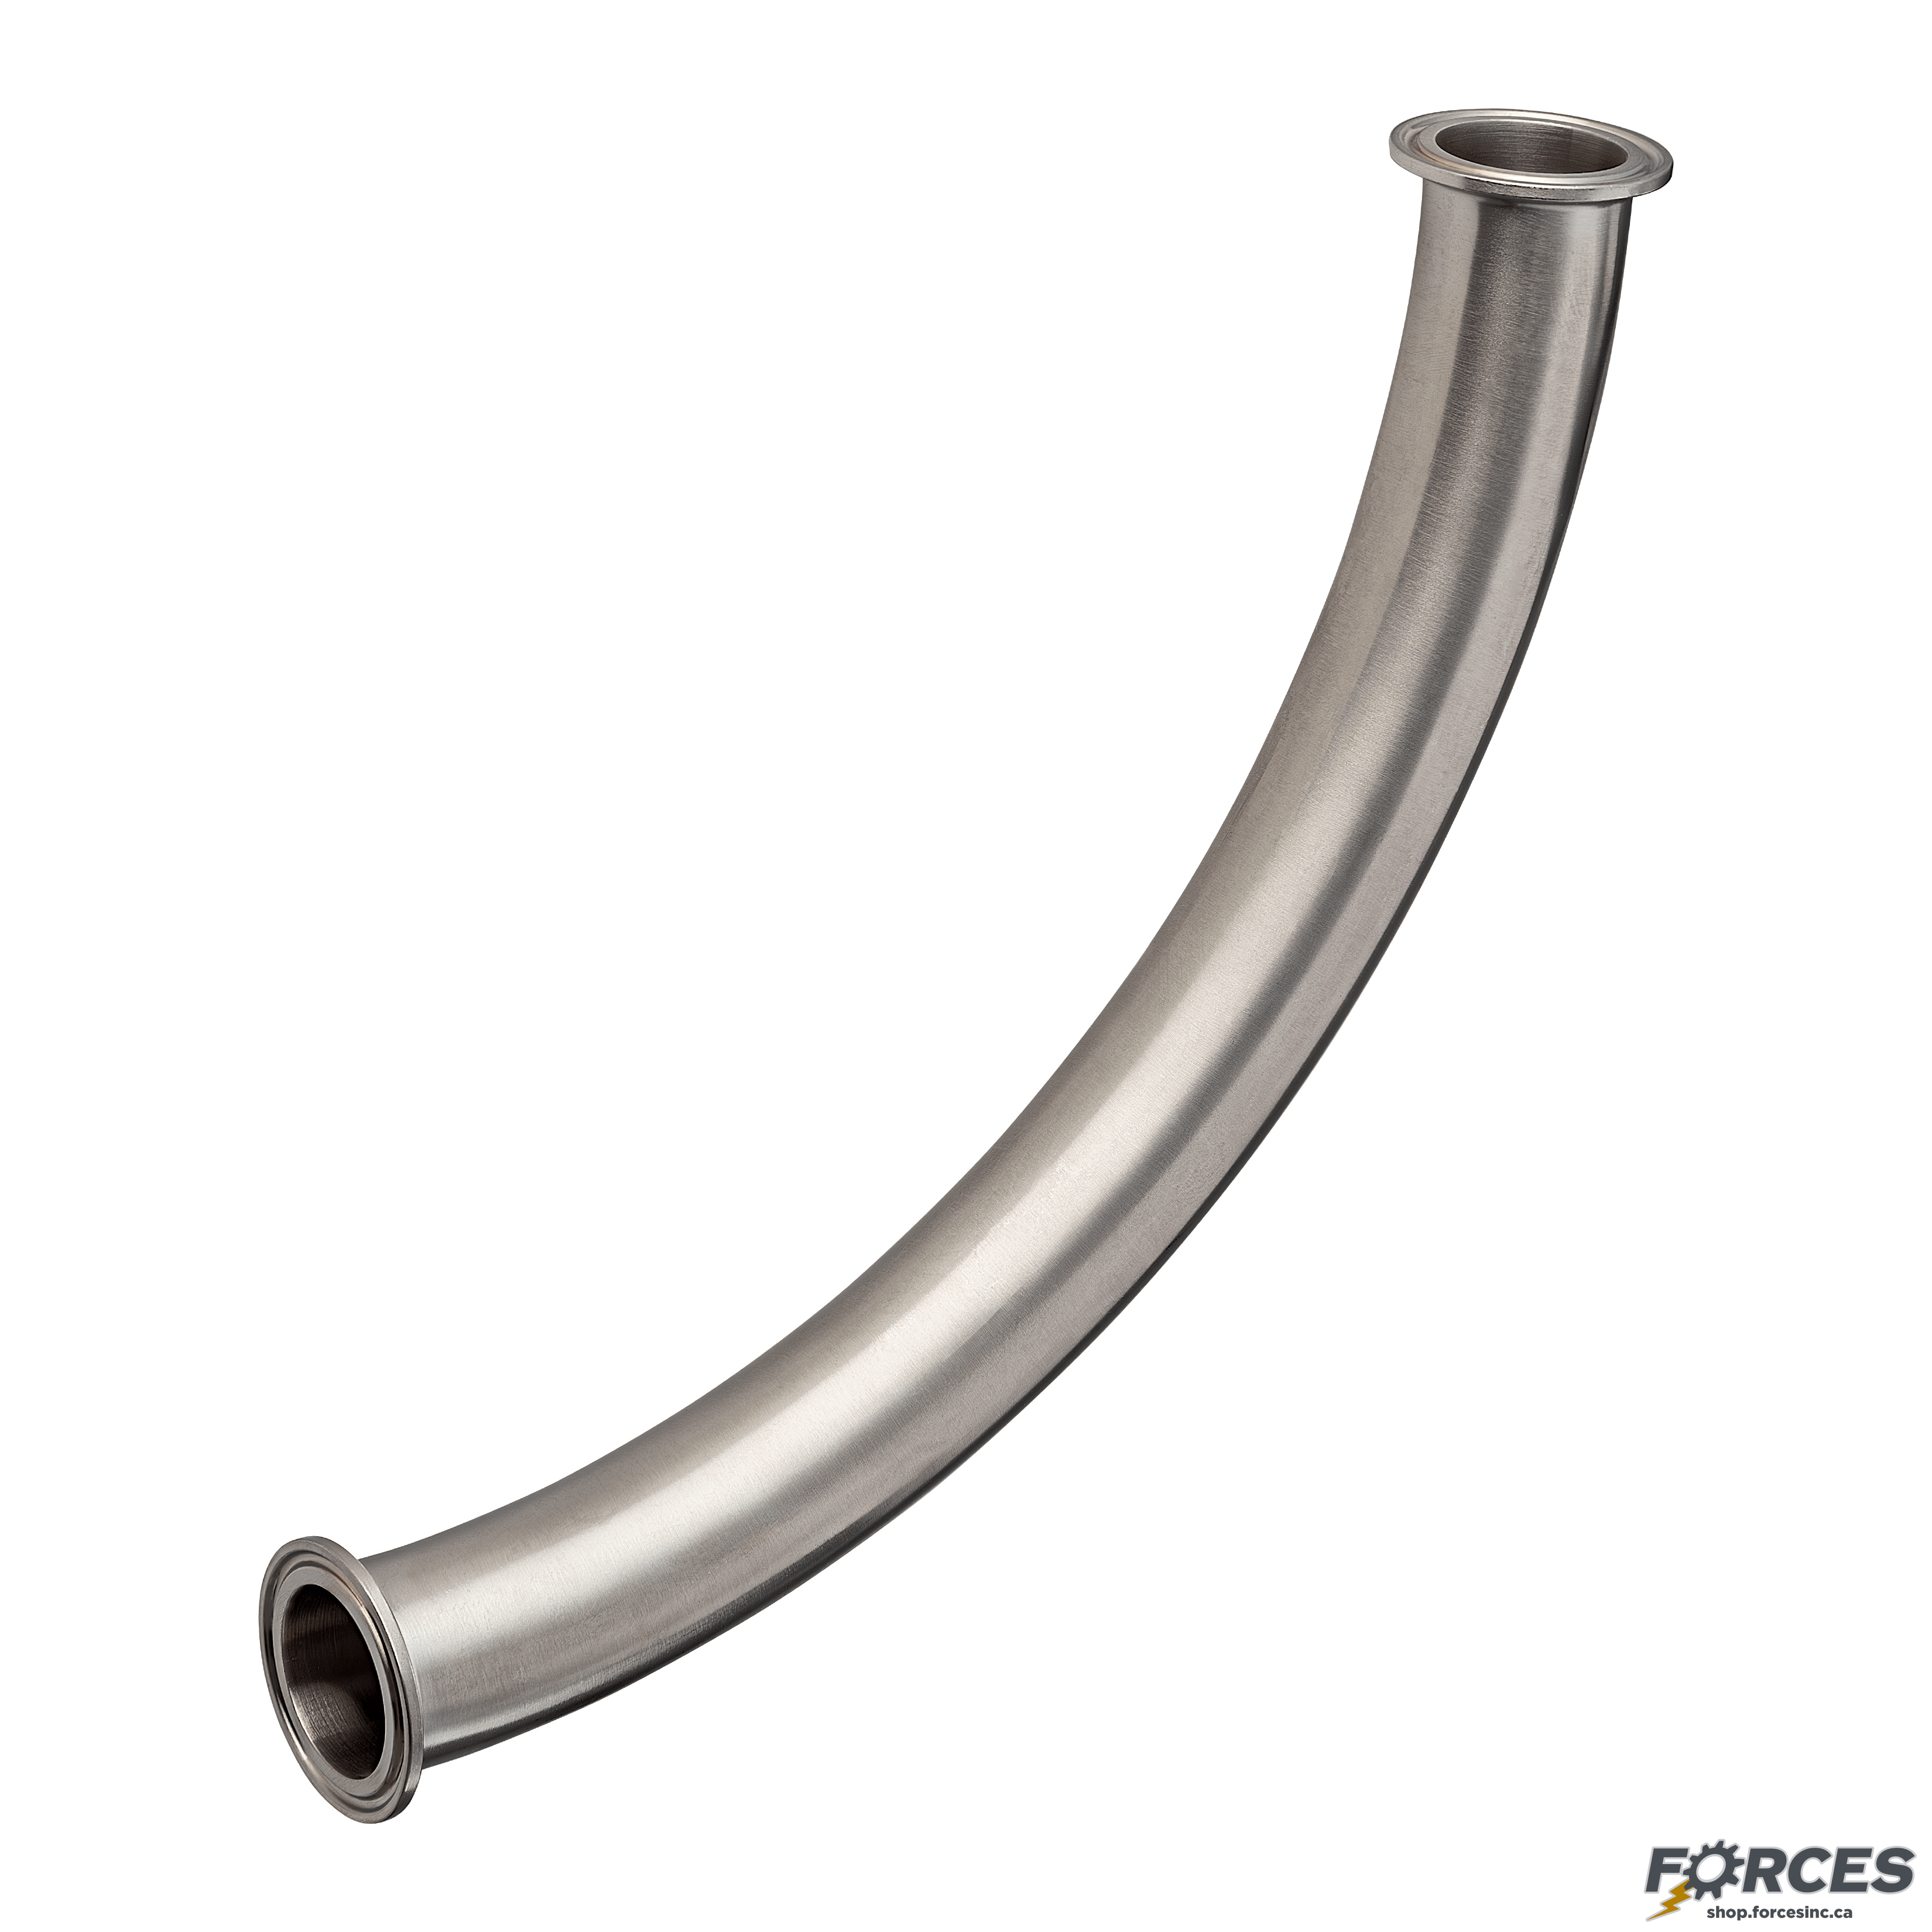 1-1/2" x 8-1/2" Tri-Clamp 90° Elbow Long Radius - Stainless Steel 304 - Forces Inc